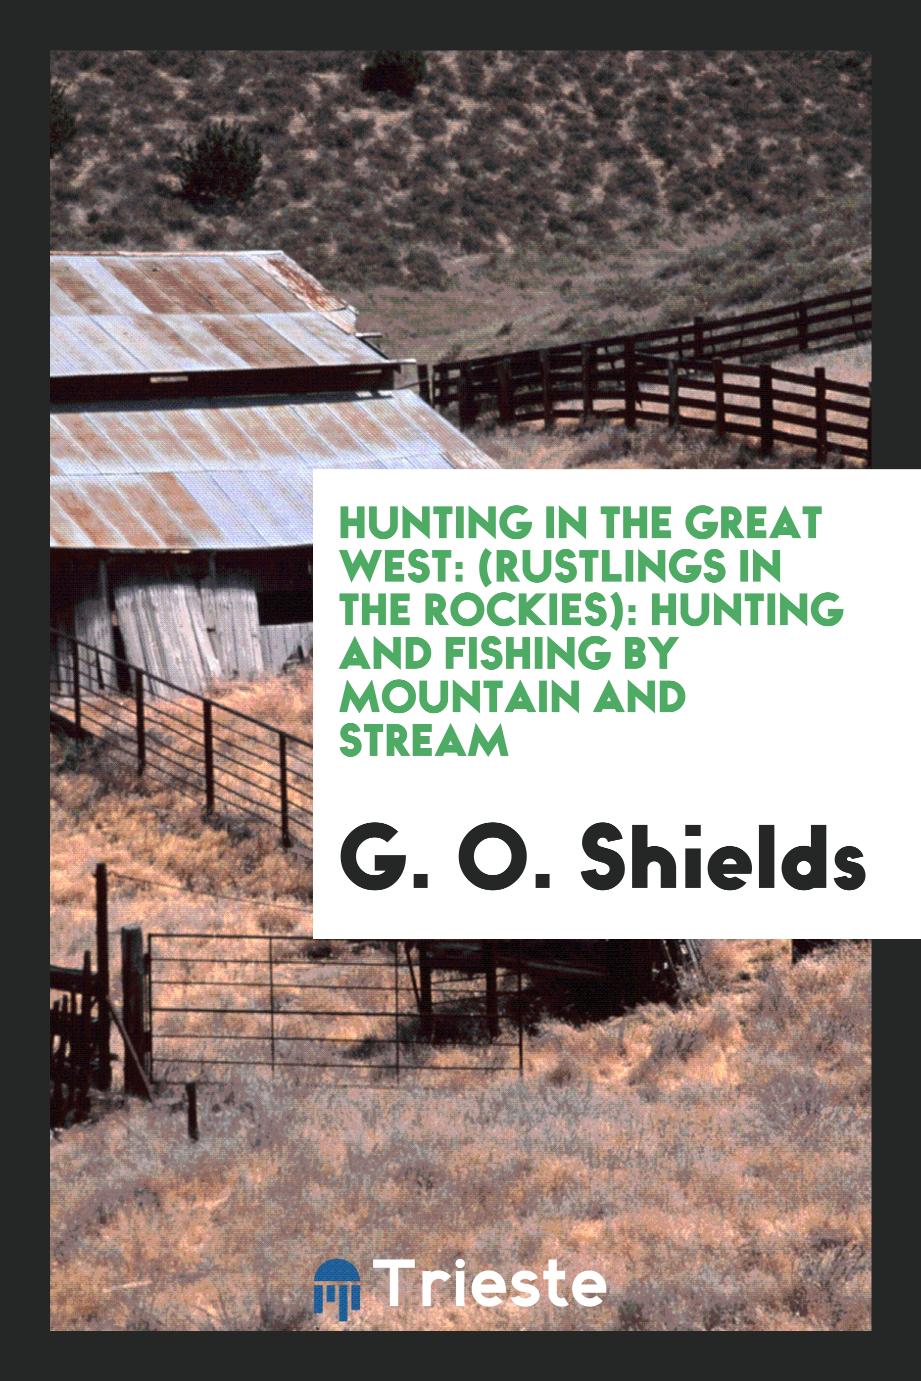 Hunting in the Great West: (Rustlings in the Rockies): Hunting and Fishing by Mountain and Stream